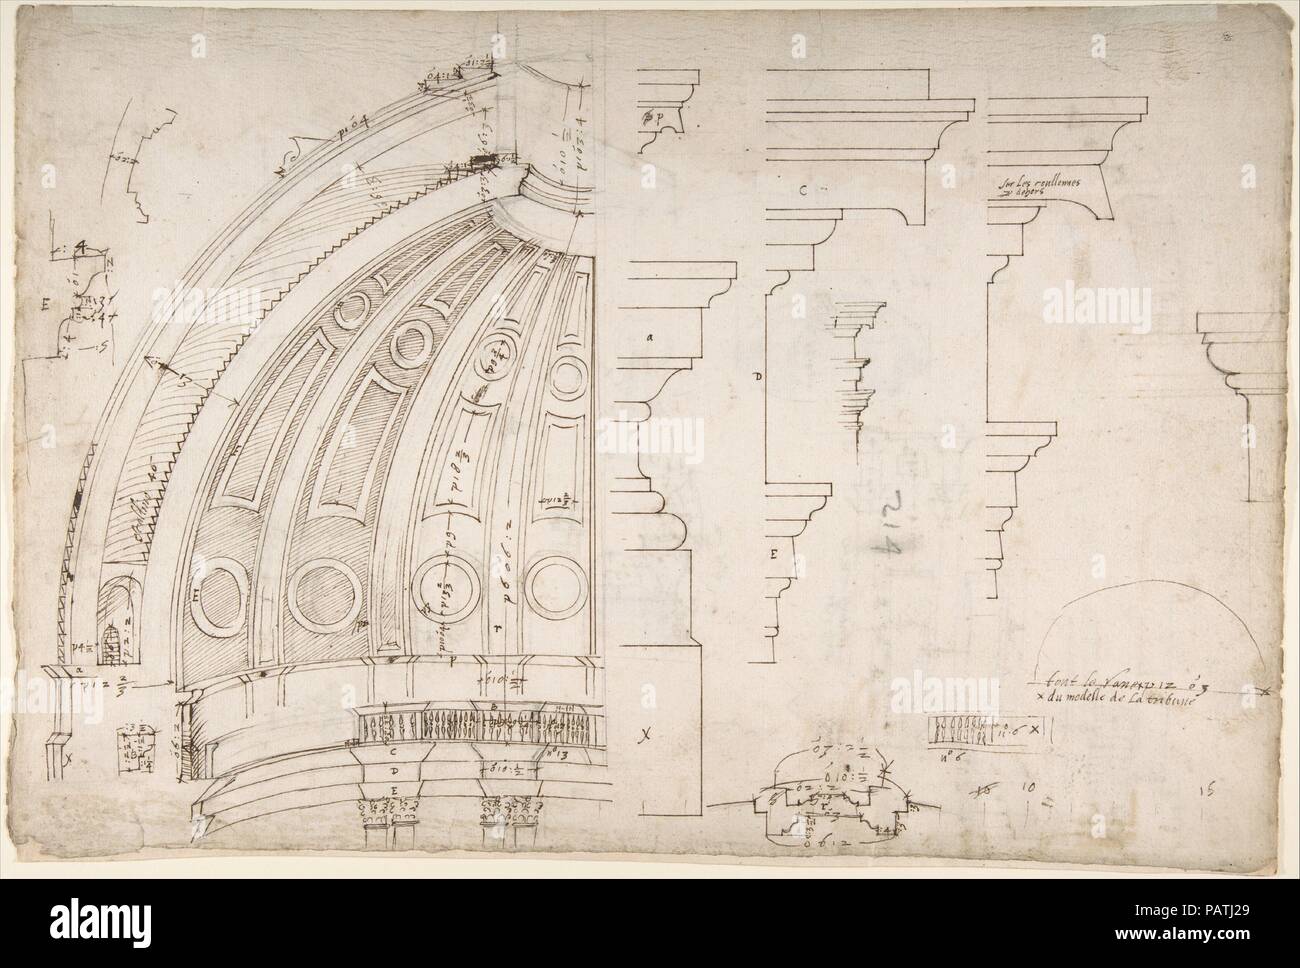 St. Peter's, dome and drum, interior section and elevation, and labeled details (recto); St. Peter's, moulding profiles, details  (verso). Artist: Attributed to Etienne DuPérac (French, ca. 1535-1604). Dimensions: sheet: 11 13/16 x 17 5/16 in. (30 x 44 cm). Date: early to mid-16th century. Museum: Metropolitan Museum of Art, New York, USA. Stock Photo